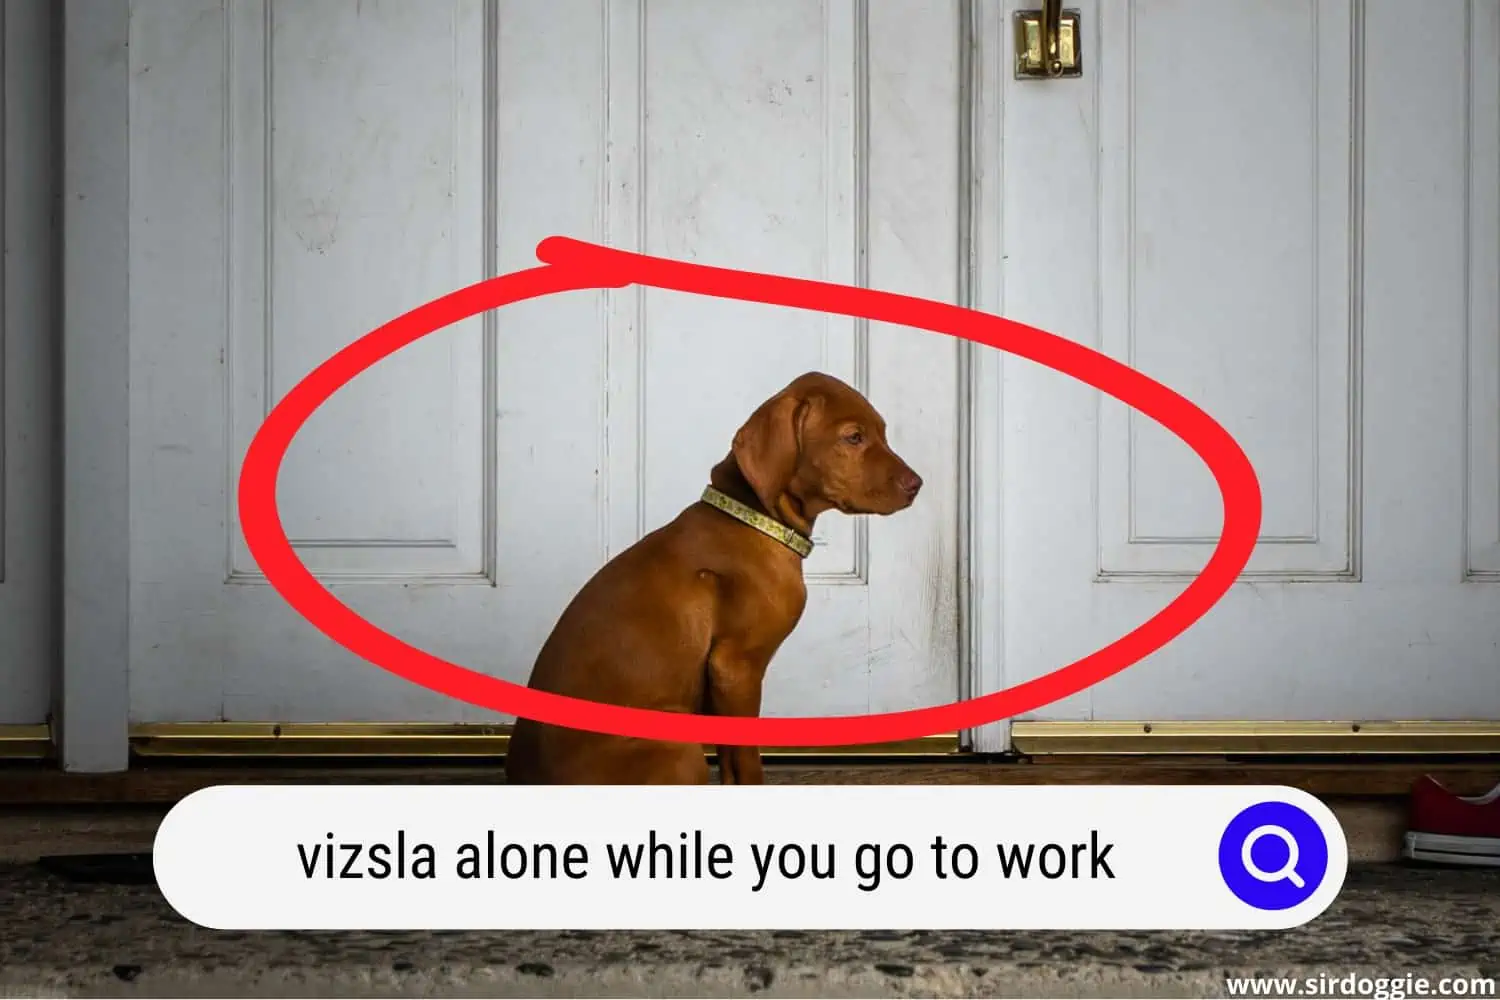 A Vizsla dog sitting in front of the door while waiting for his owner to come home from work